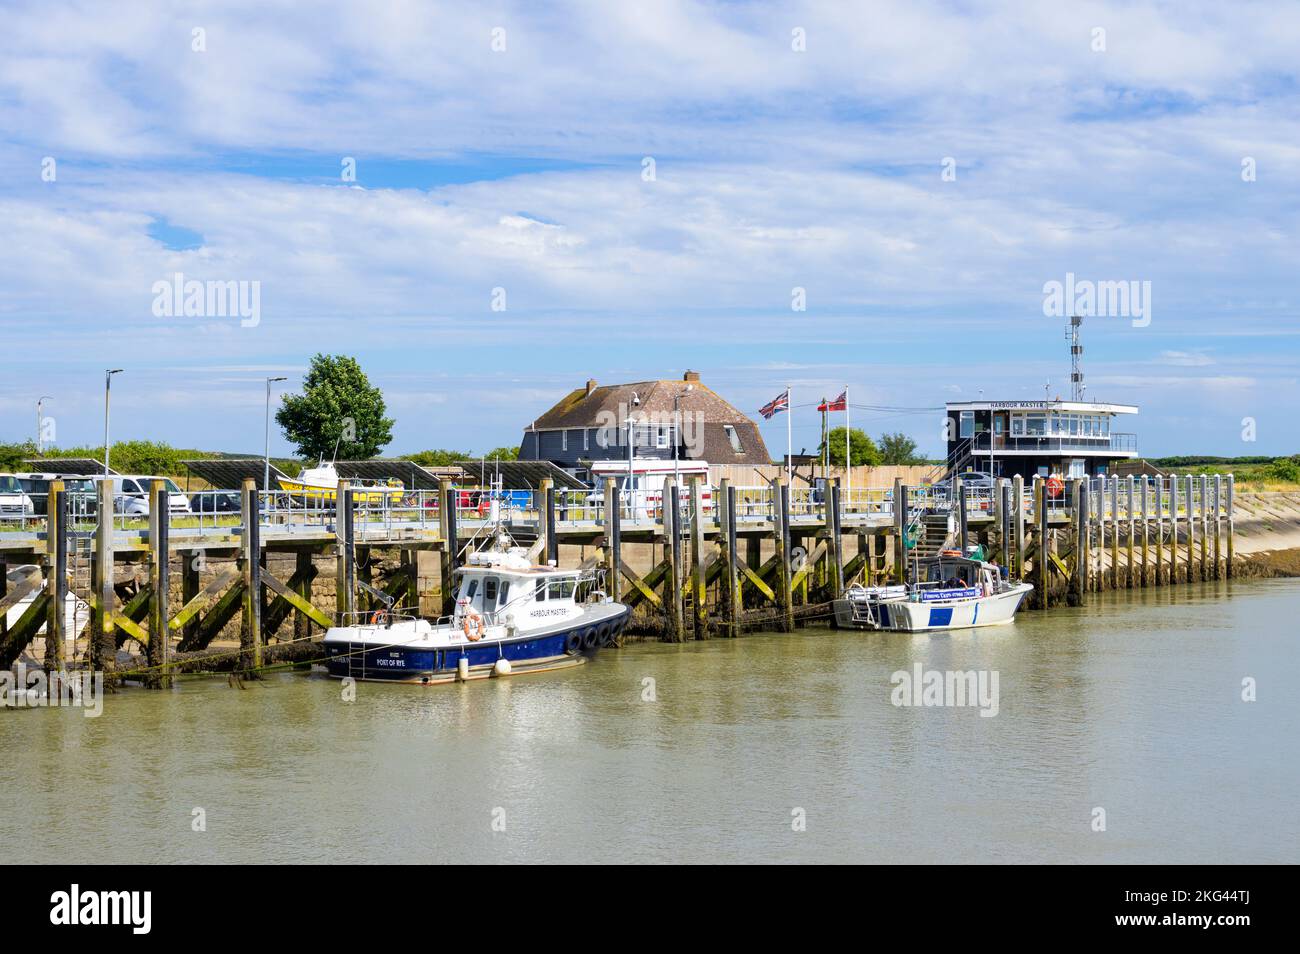 Boats moored at Rye Harbour on the River Rother near the Harbour Master’s office on the east bank of the river Rother Sussex England UK GB Europe Stock Photo